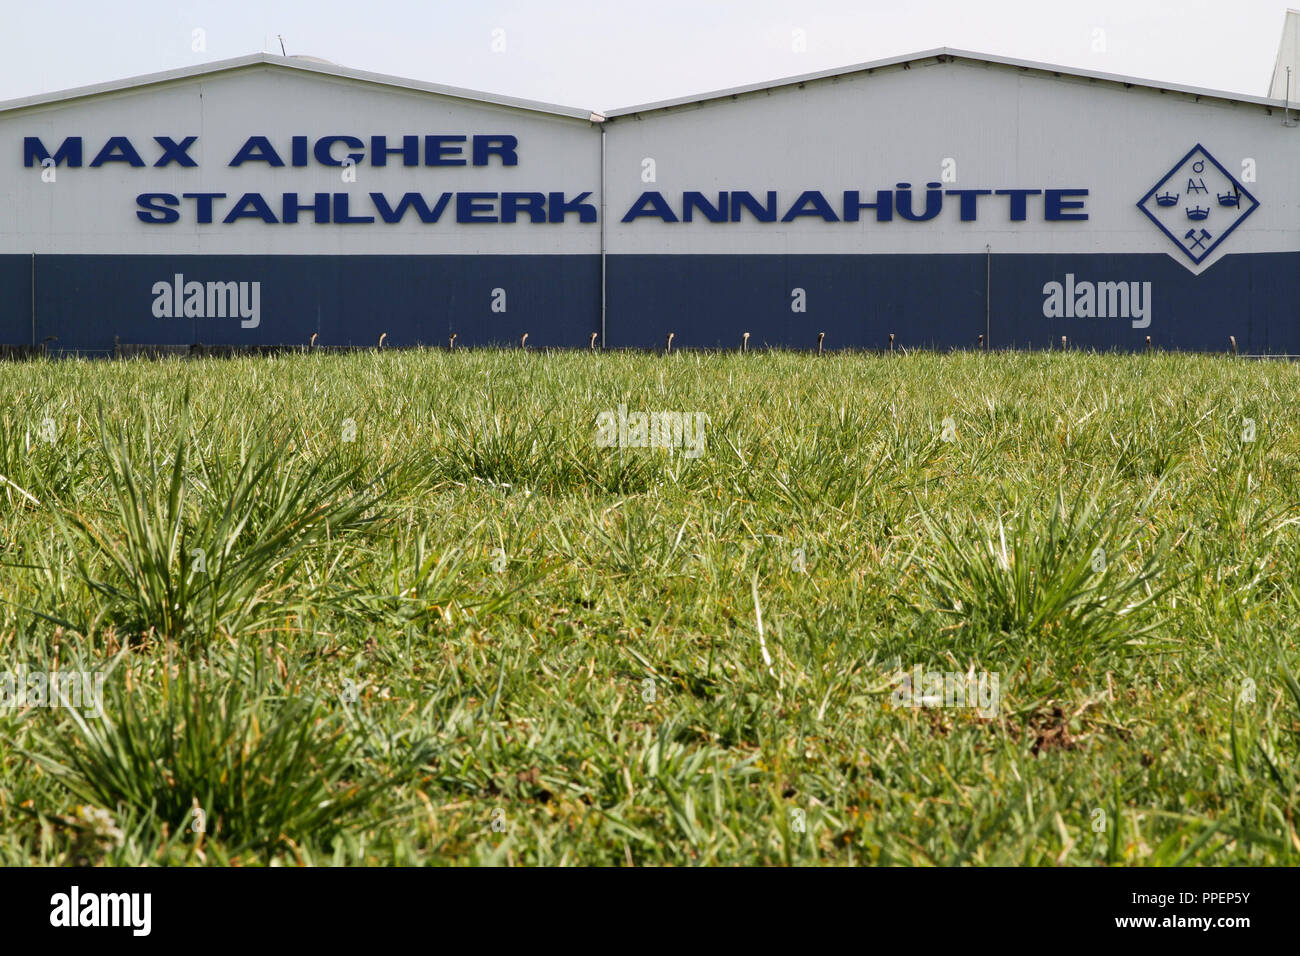 The steelwork Stahlwerk Annahuette of the Max Aicher Group in the Ainring district of Hammerau. Stock Photo